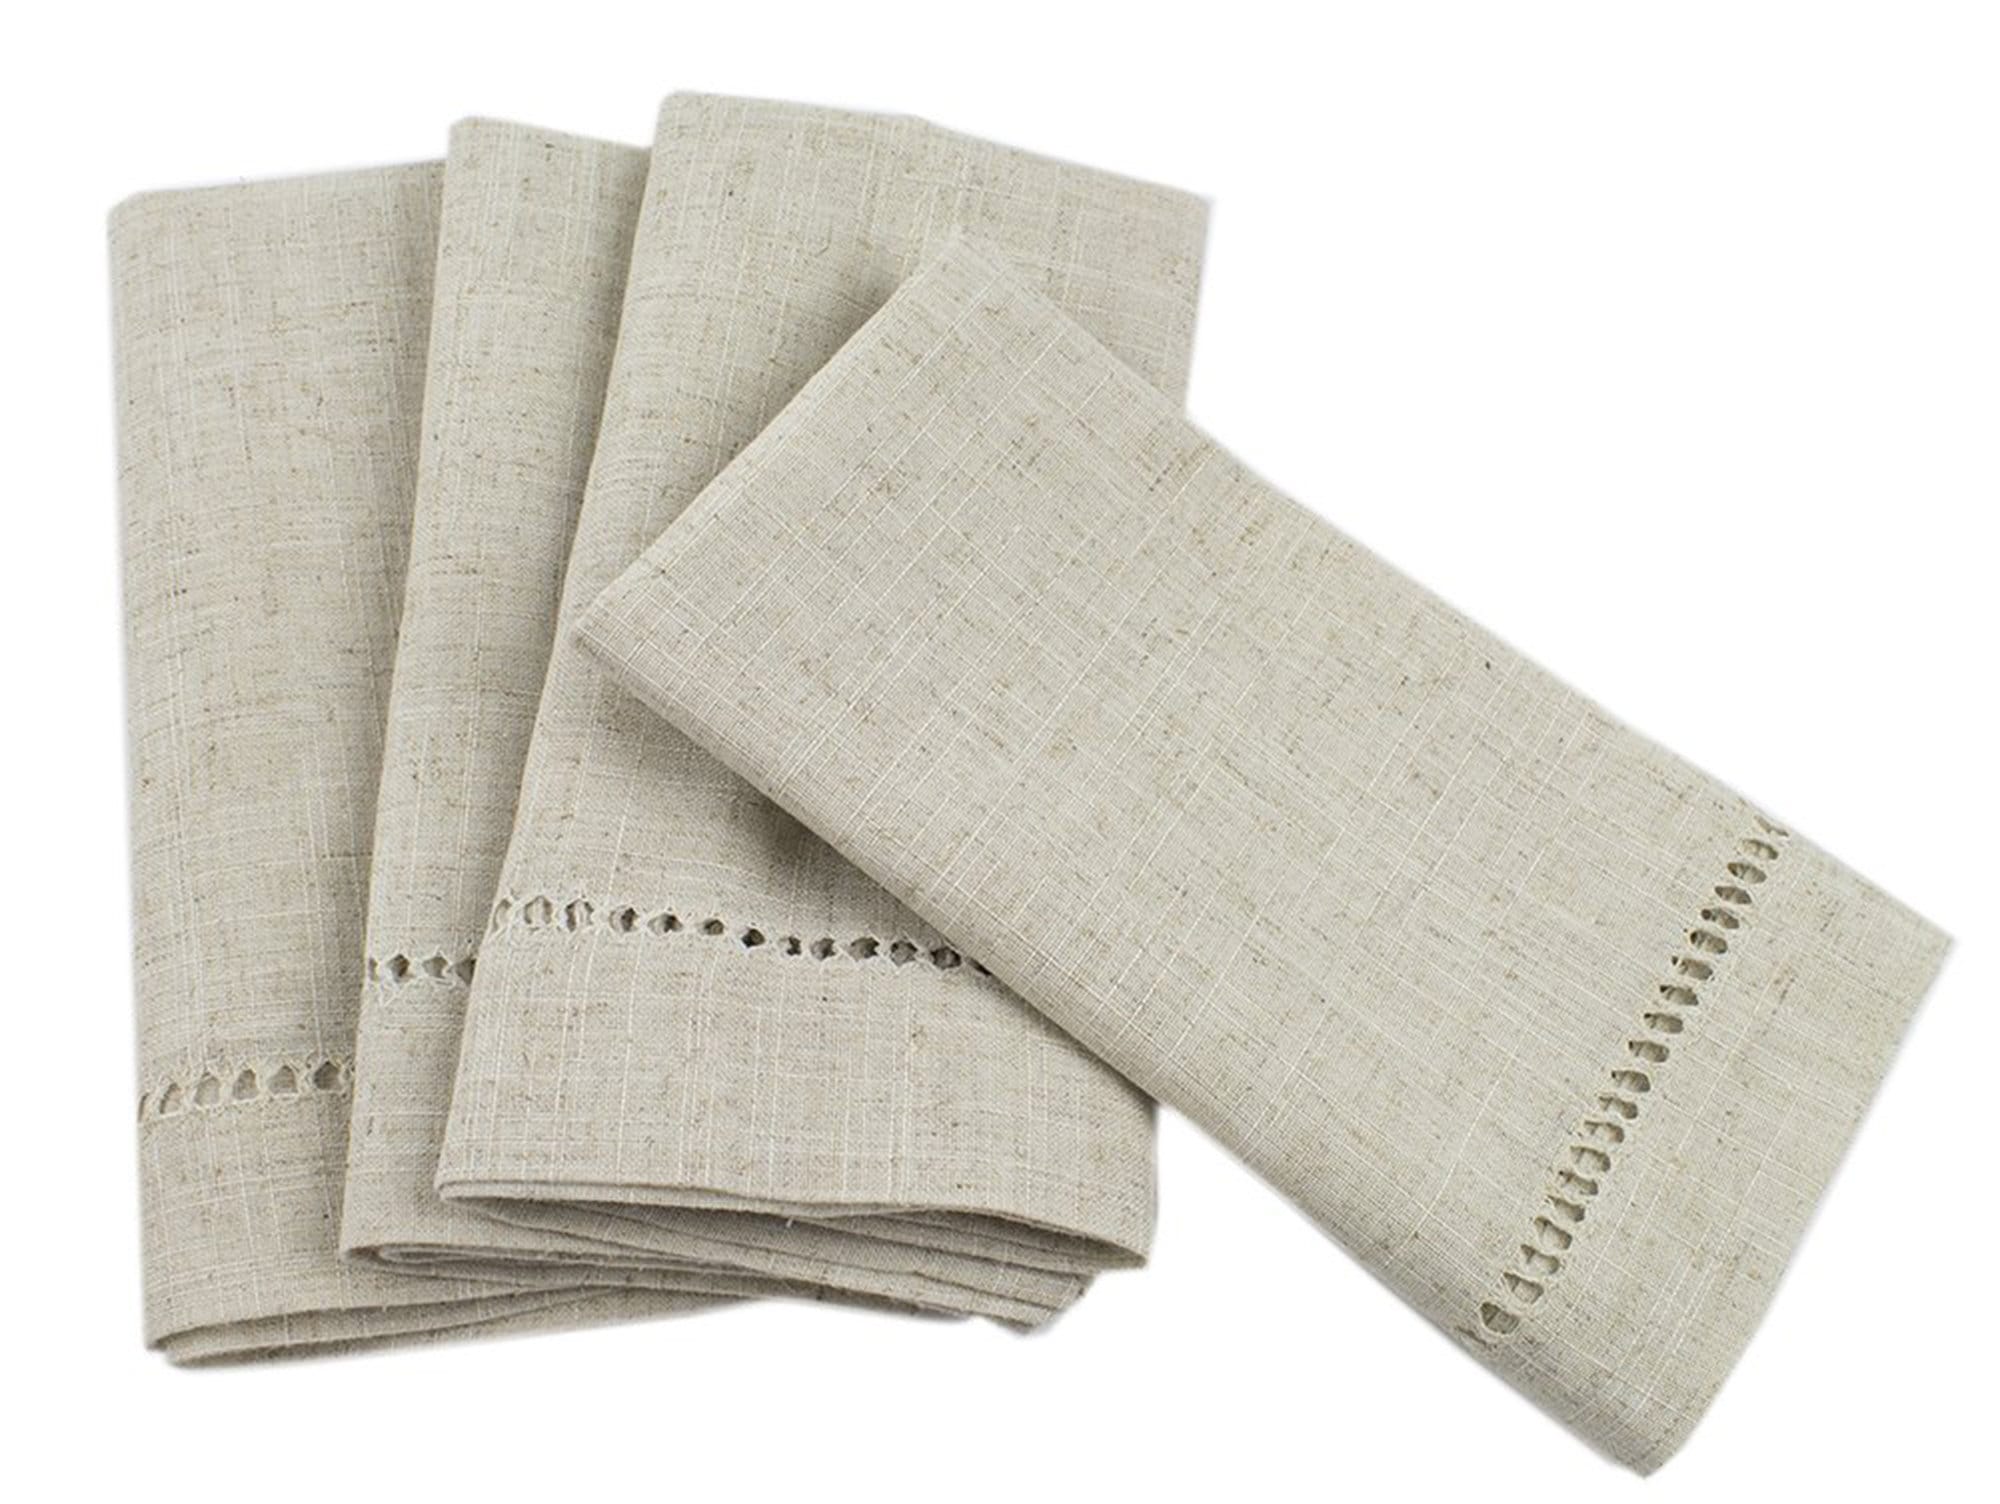 Luxe Hemstitch Bordered Linen Napkins - Set of 4, 20 X 20 inch - Multiple  Colors